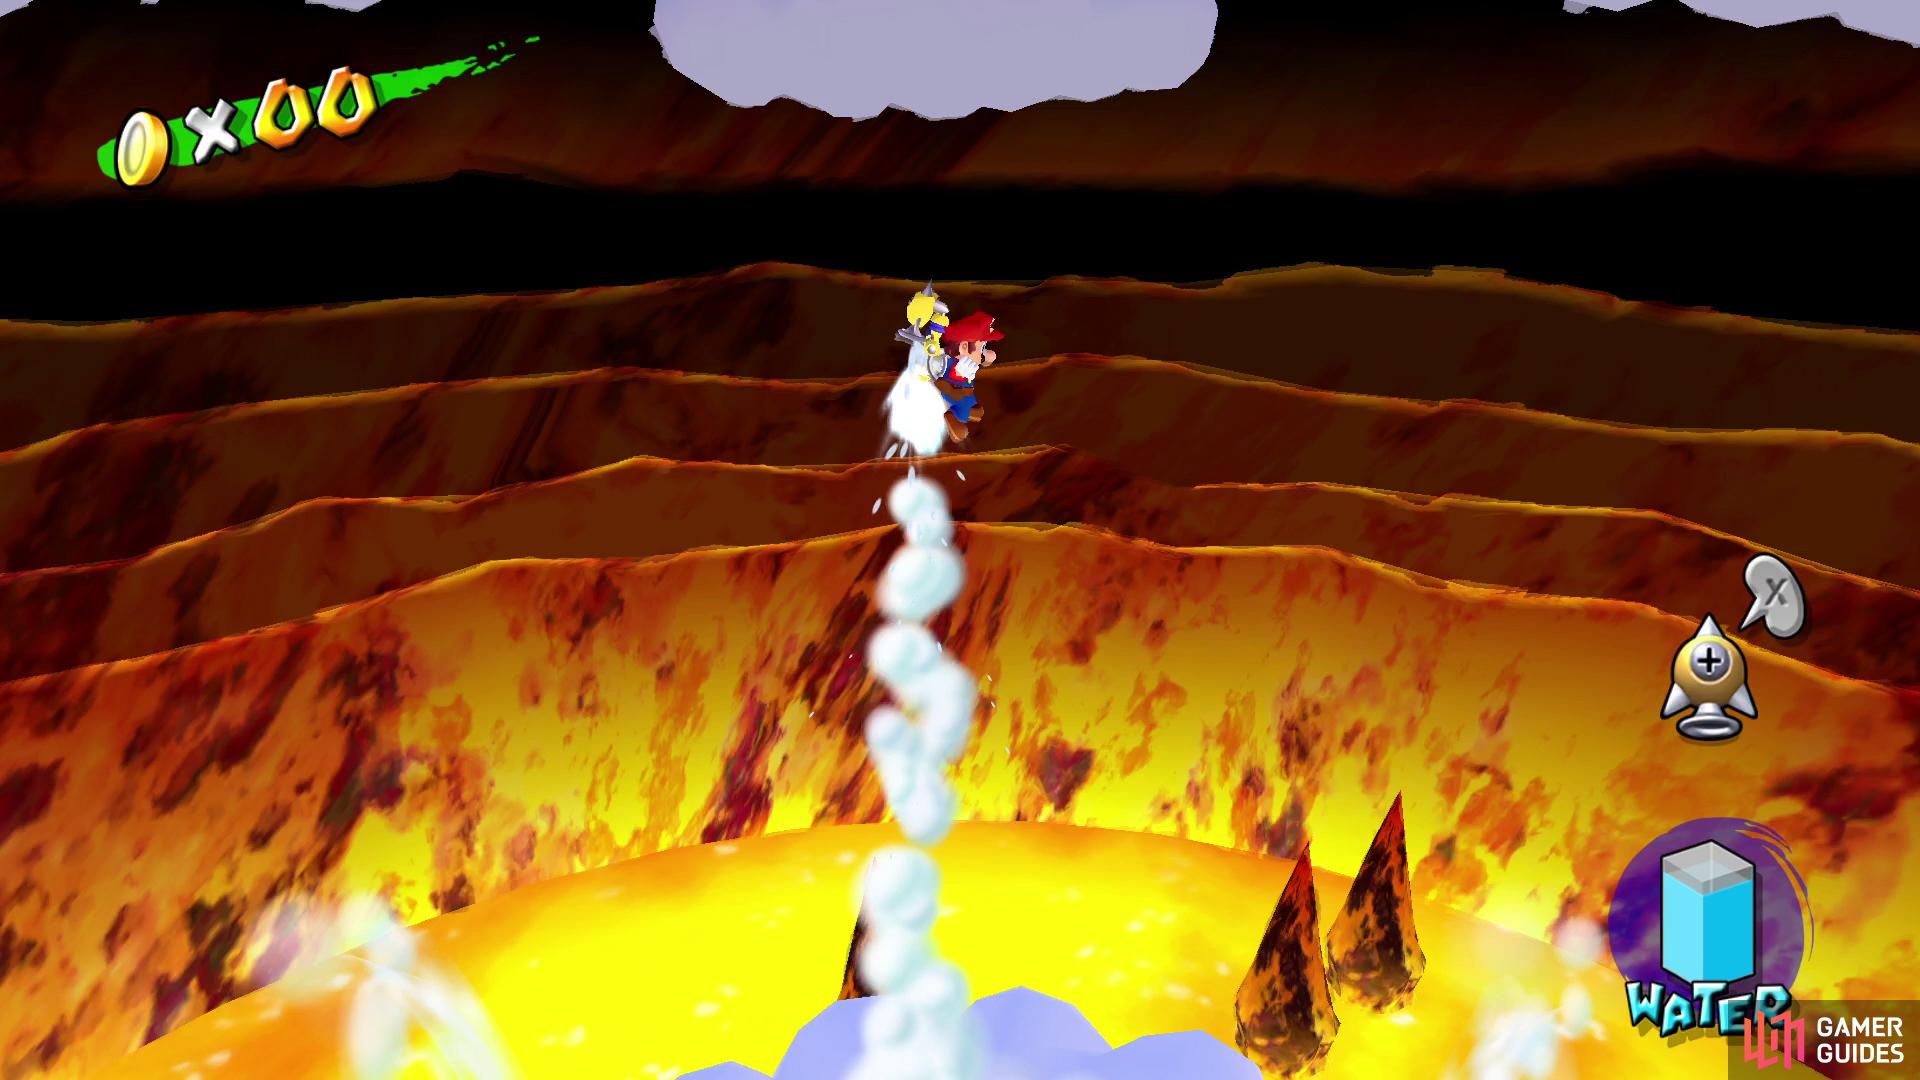 finally, use the Rocket Nozzle to blast onto the clouds and to the boss battle arena.